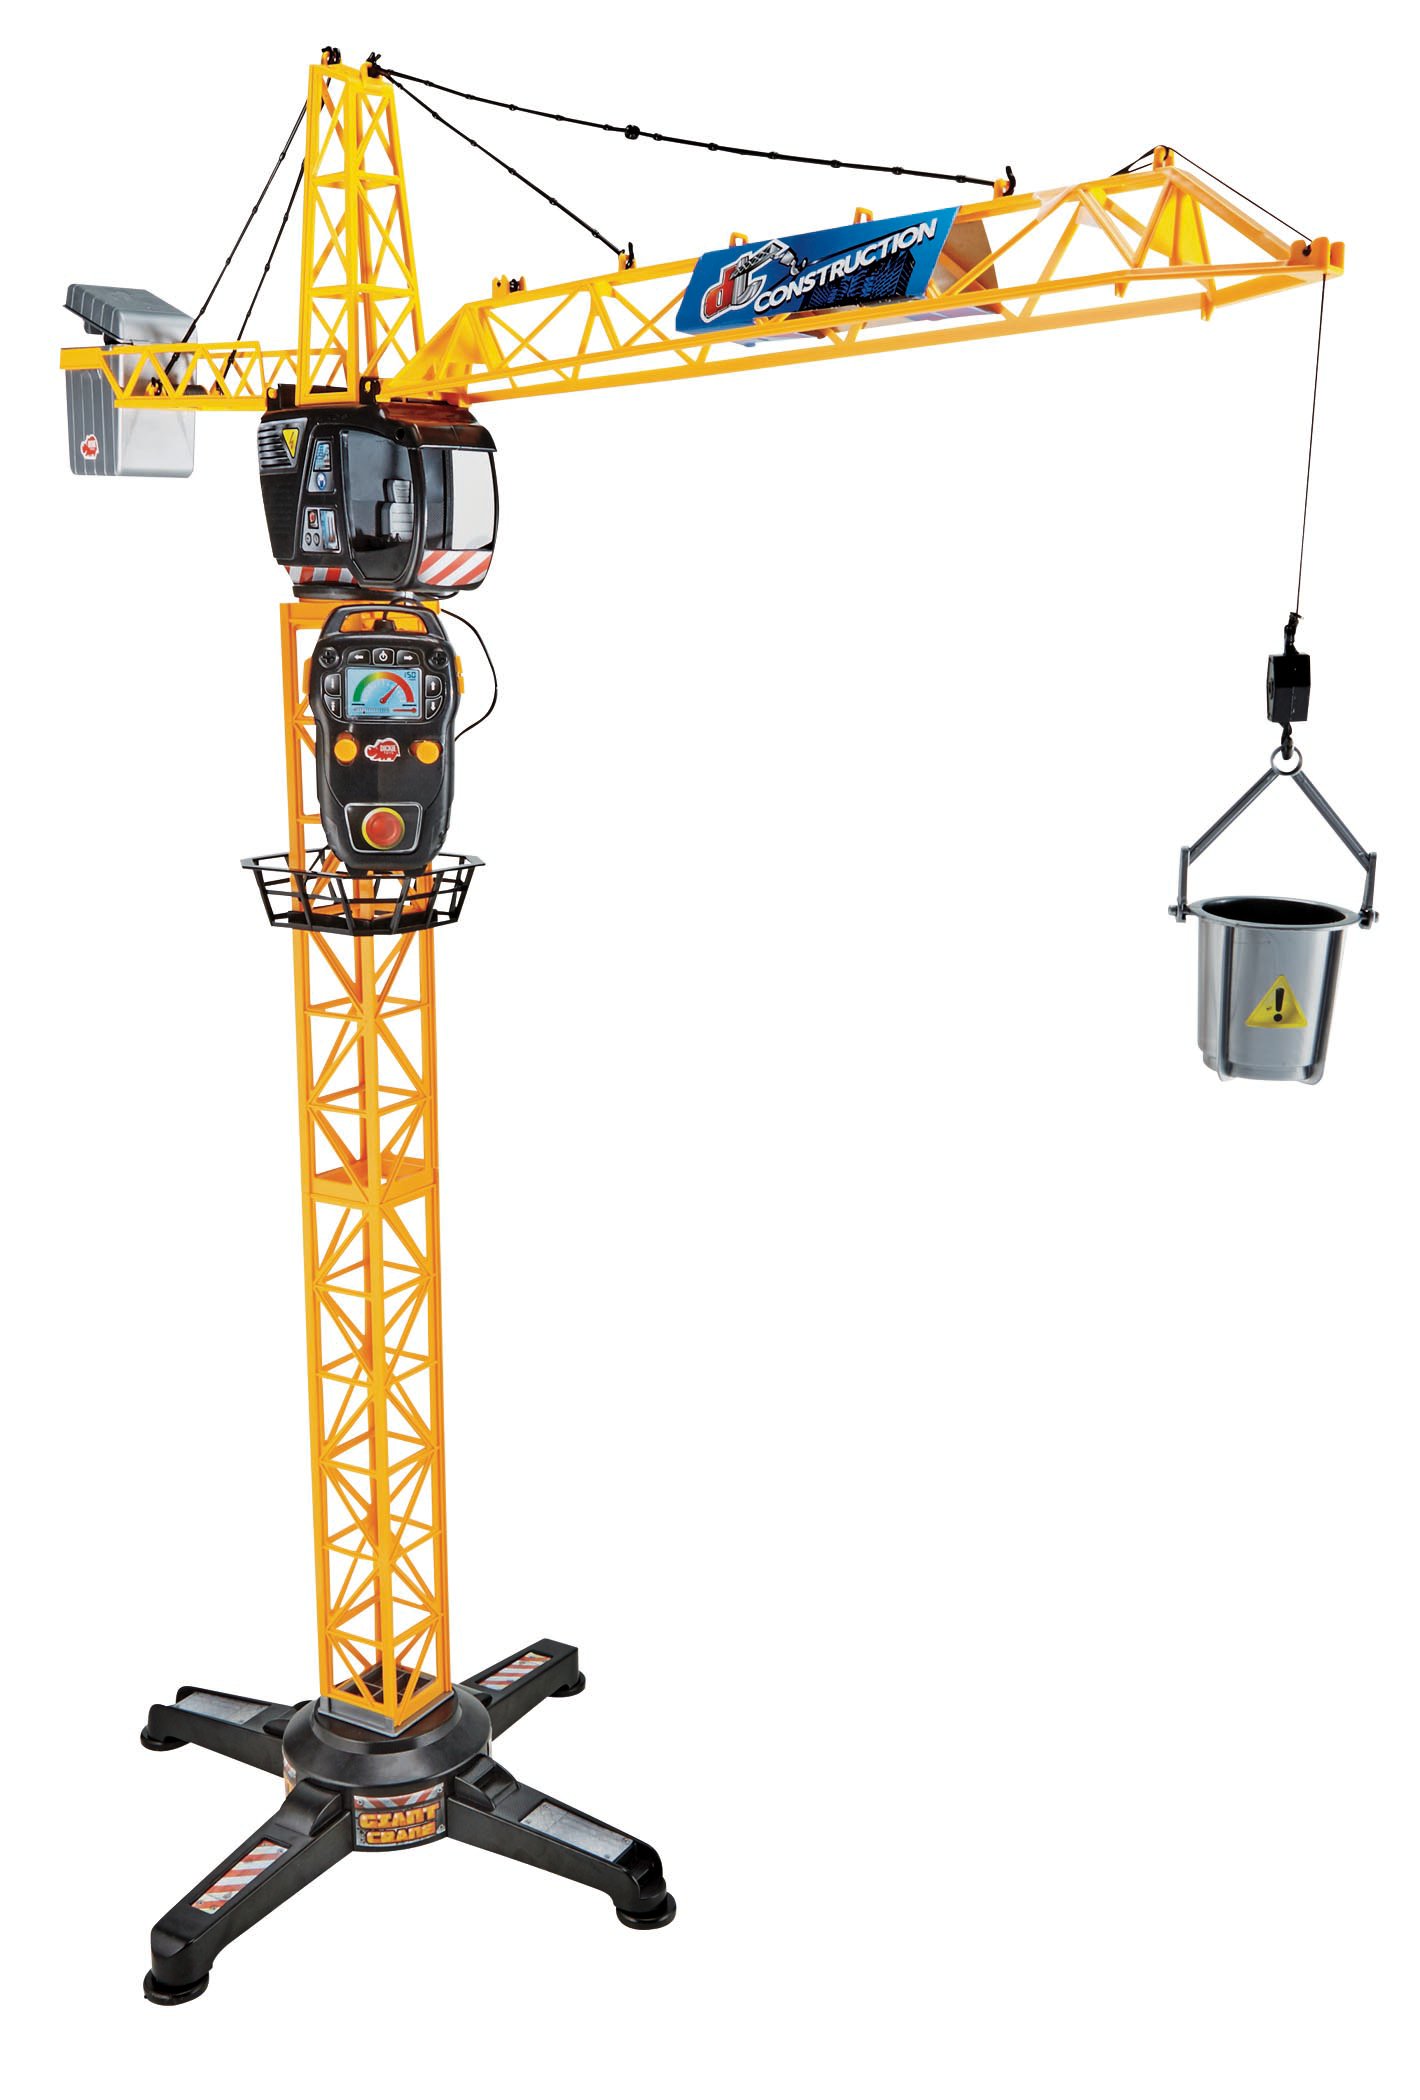 Details about   Dickie Toys 40" Giant Crane Playset 